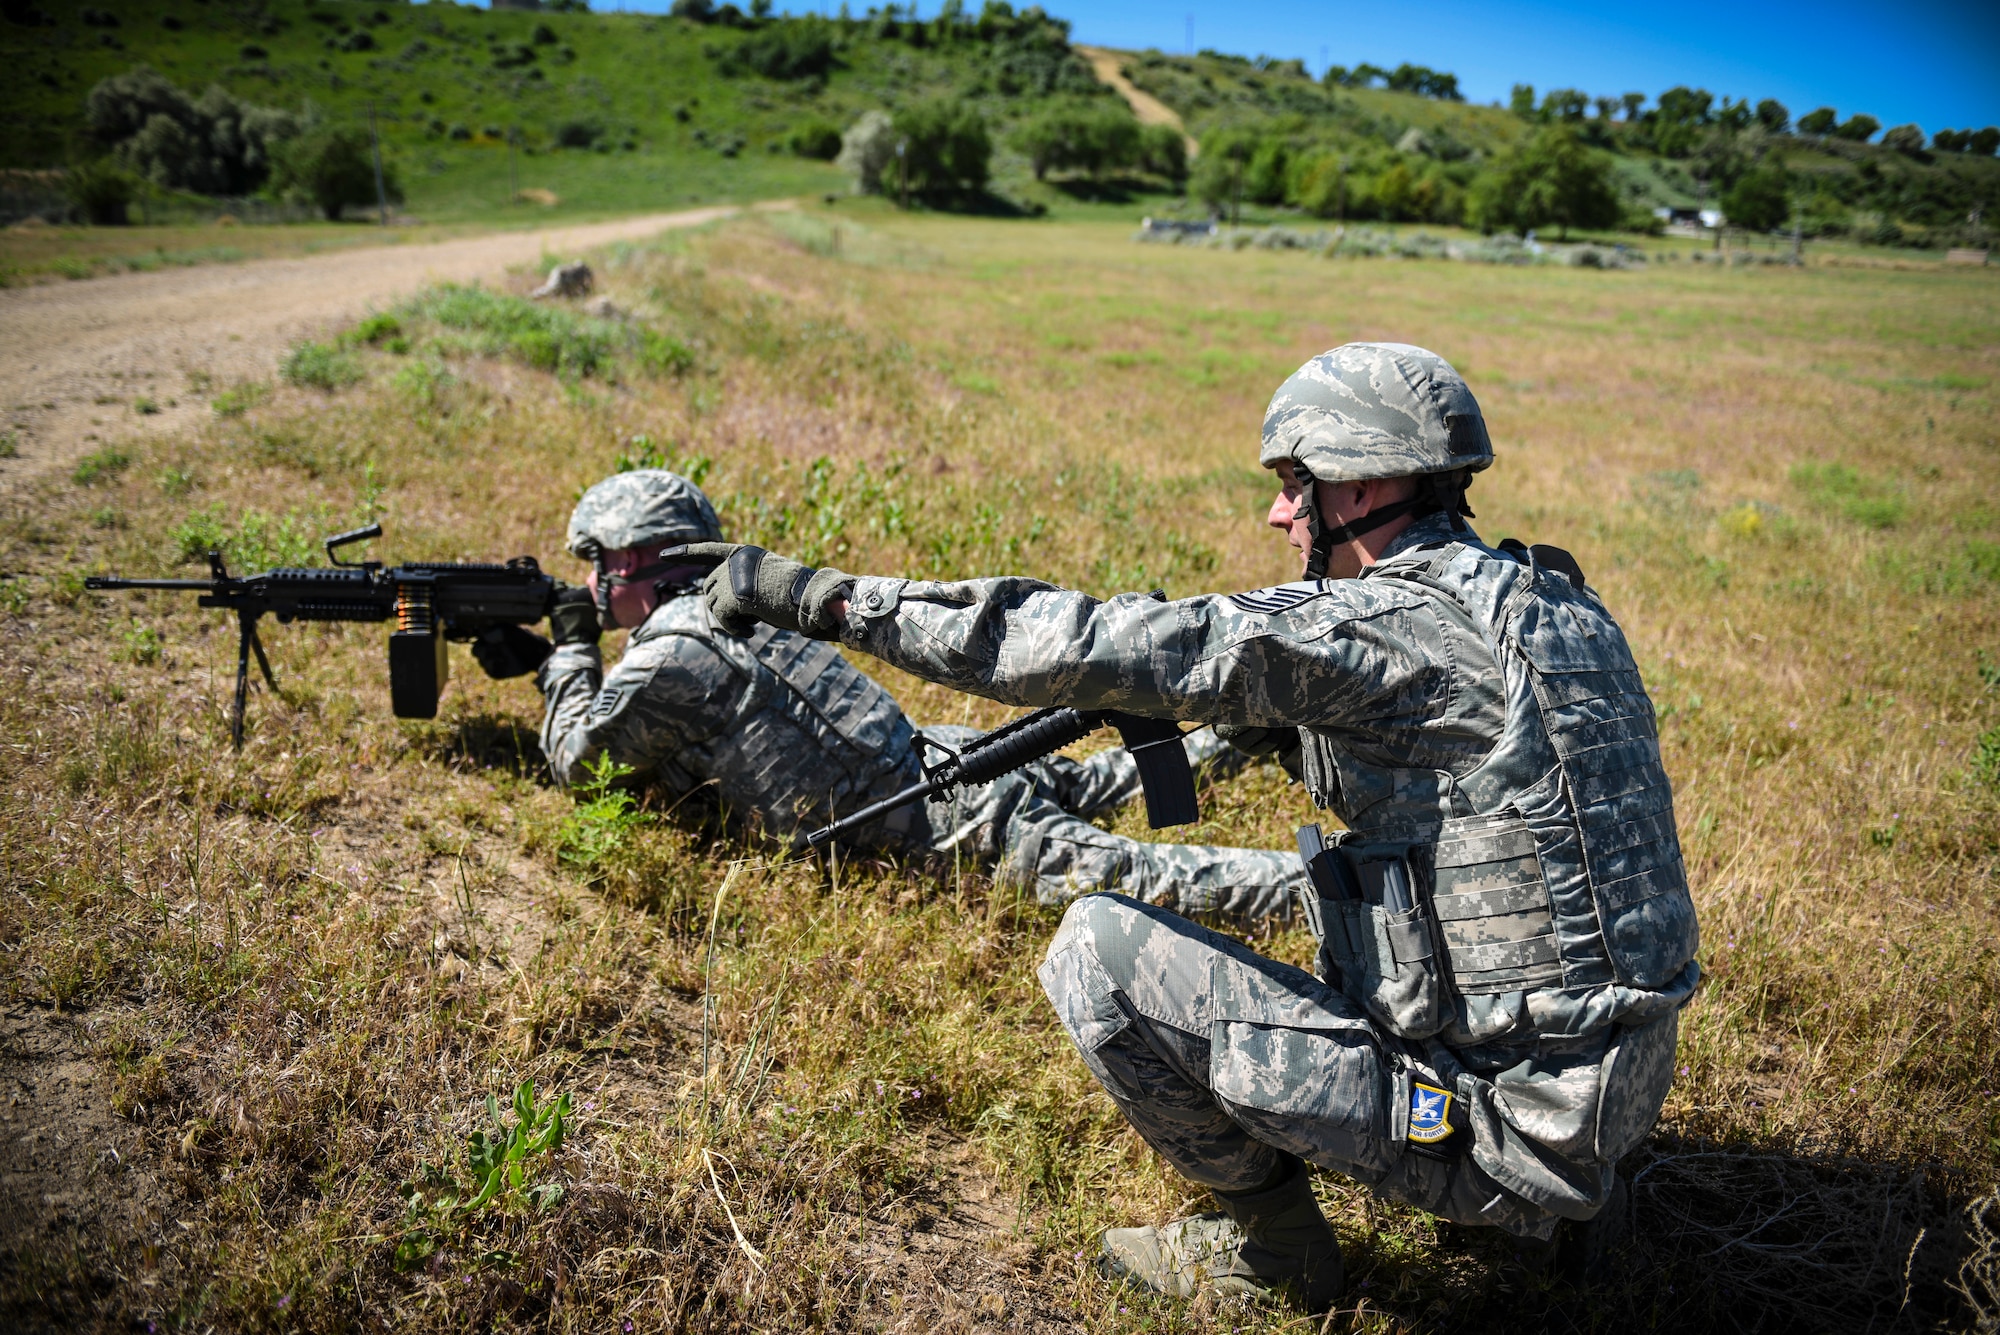 Staff Sgt. Robert Brinton, fire team leader in the 419th Security Forces Squadron, takes aim down range while Master Sgt. David Hasseler, 419th SFS squad leader, provides cover